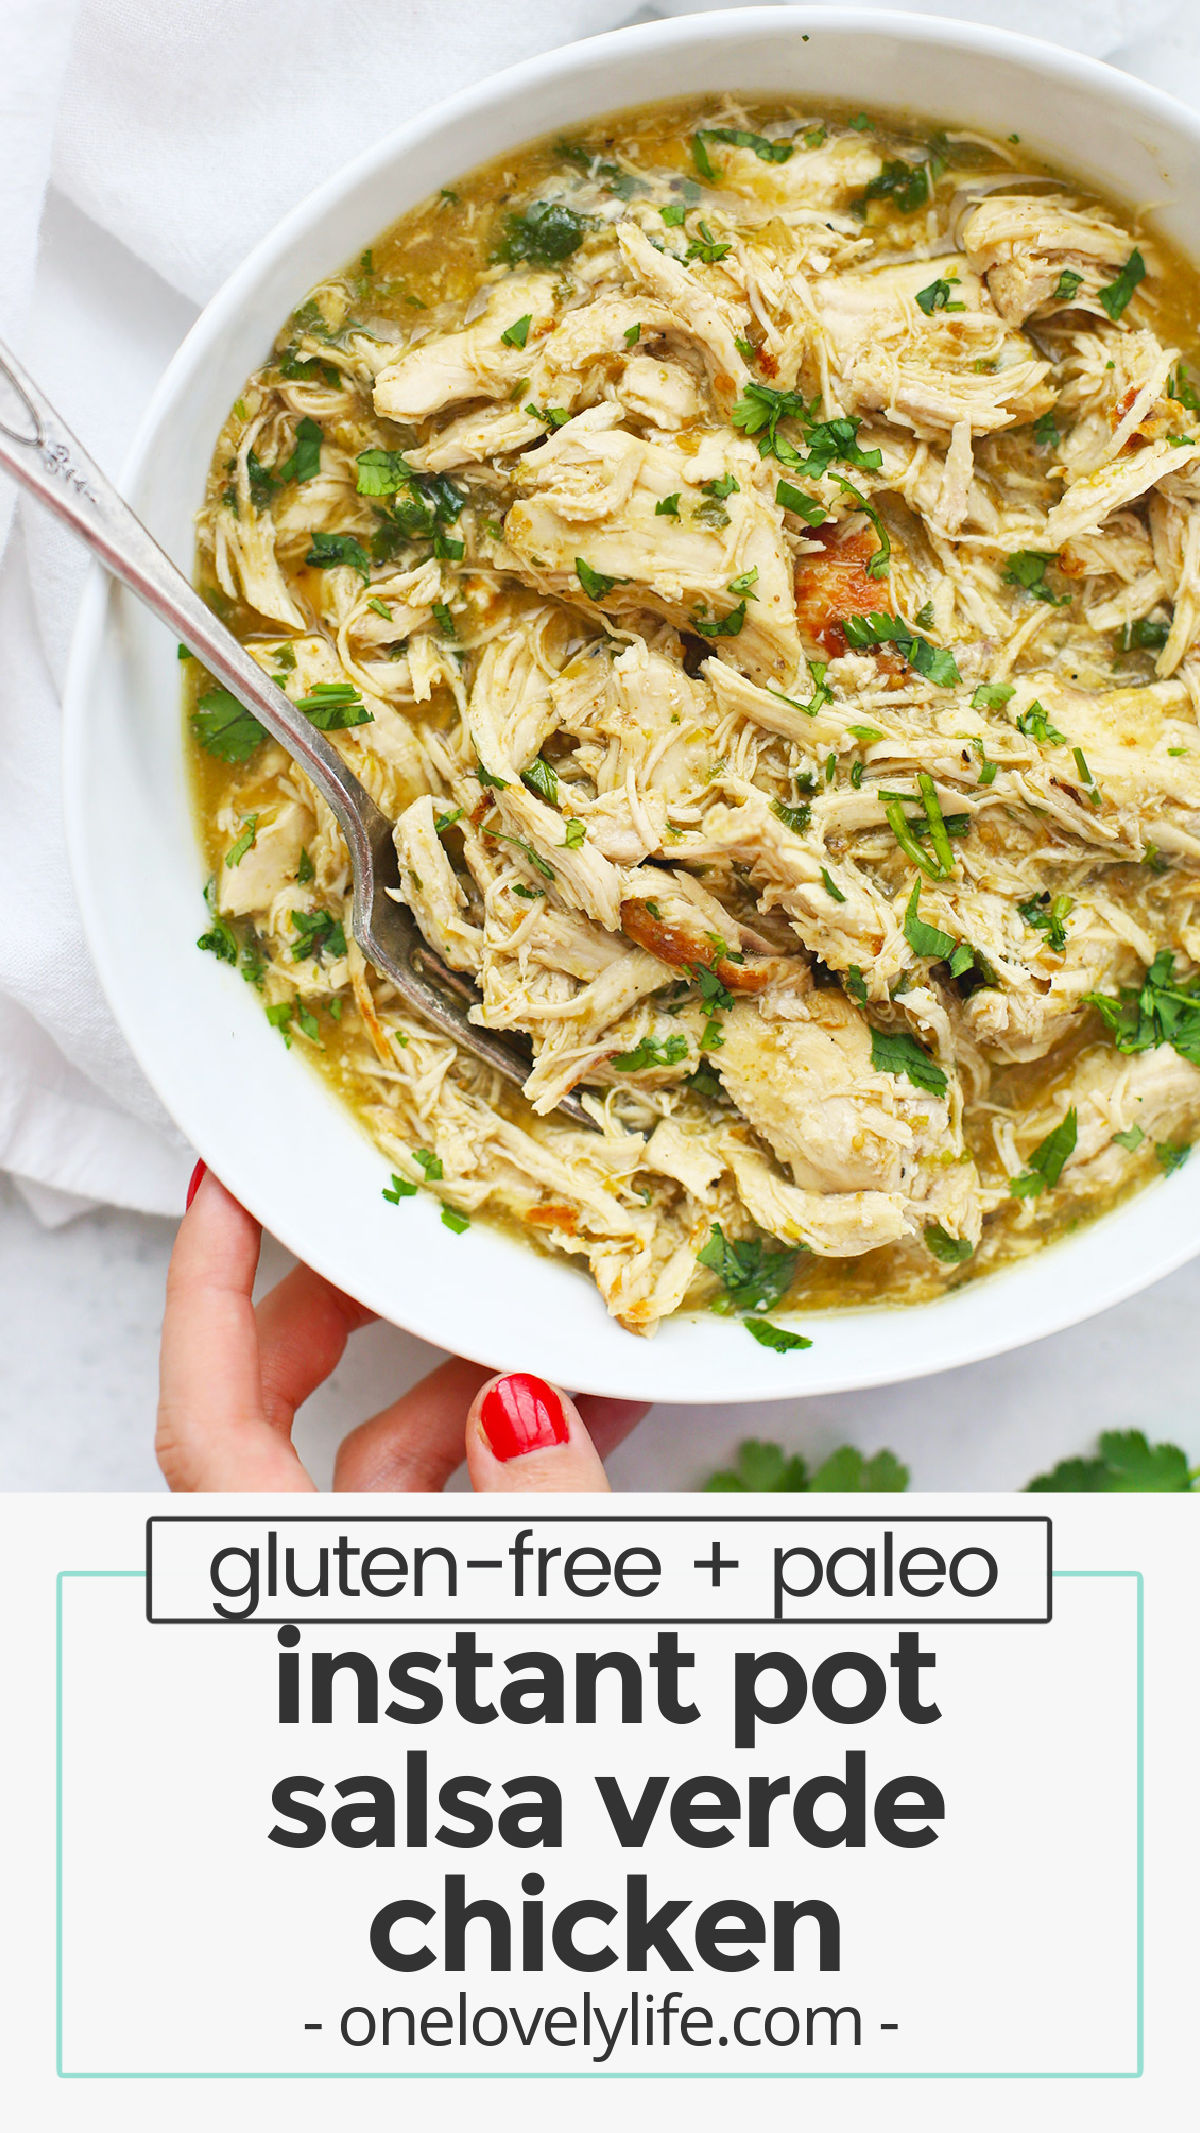 Instant Pot Salsa Verde Chicken - This Instant Pot shredded chicken uses green salsa + simple seasonings to make perfectly tender chicken that's perfect for burrito bowls, tacos, nachos, and more! (Gluten-Free, Paleo, Whole30) // Pressure Cooker Salsa Verde Chicken // Pressure Cooker Salsa Chicken // Instant Pot Salsa Chicken / instant pot chicken recipe // salsa verde chicken recipe